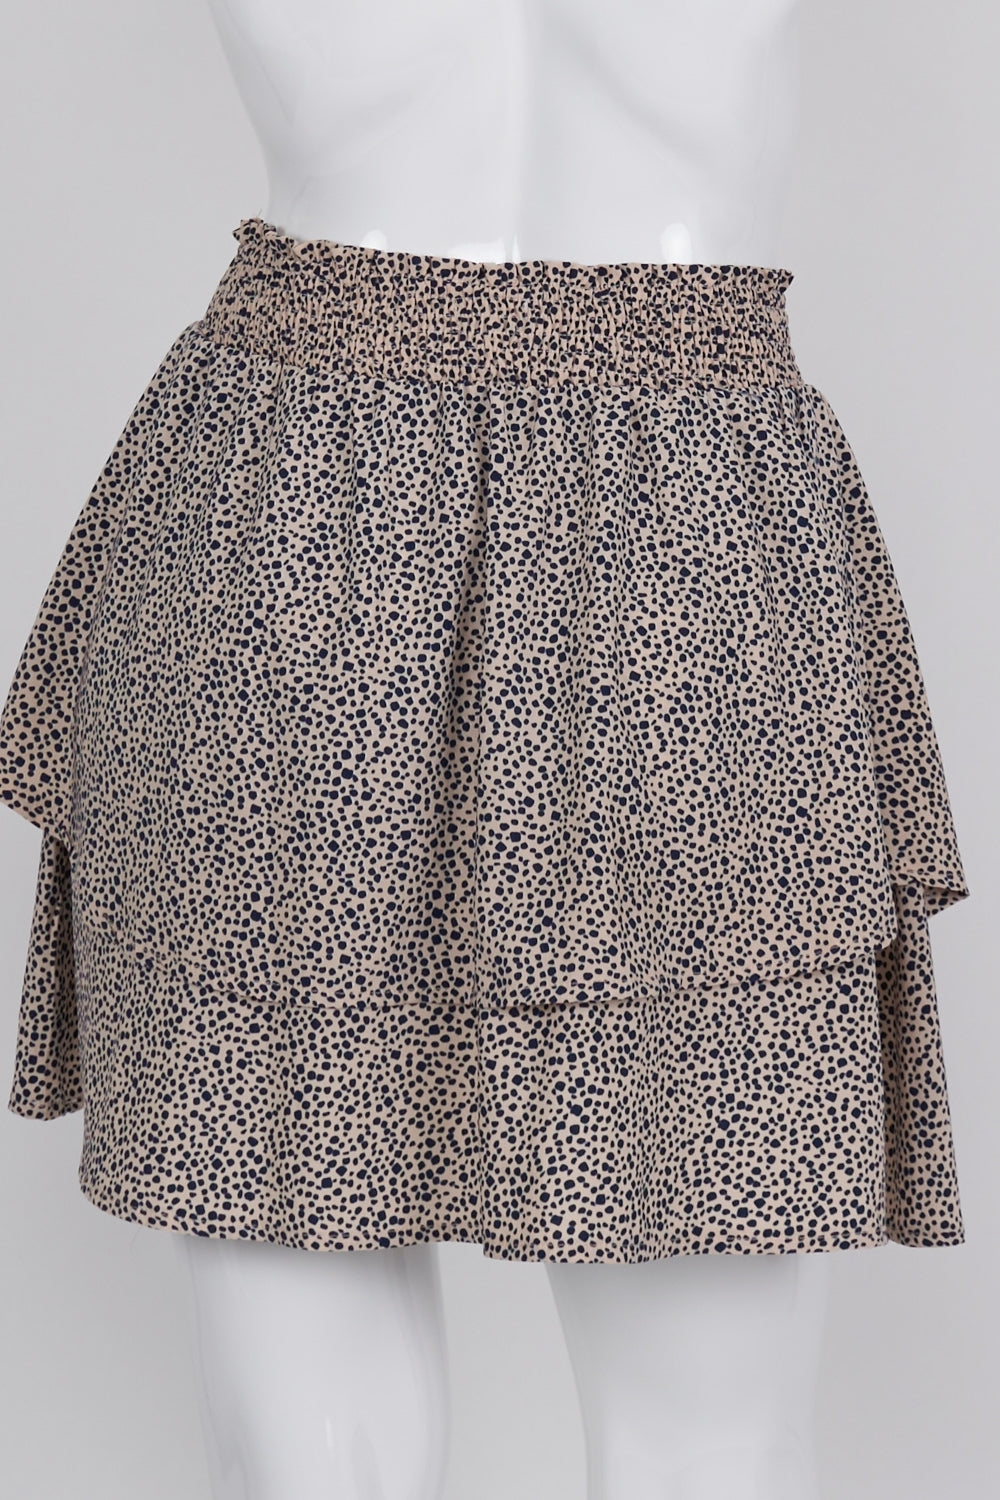 Grace &amp; Co Pink Patterned Layered Skirt 12